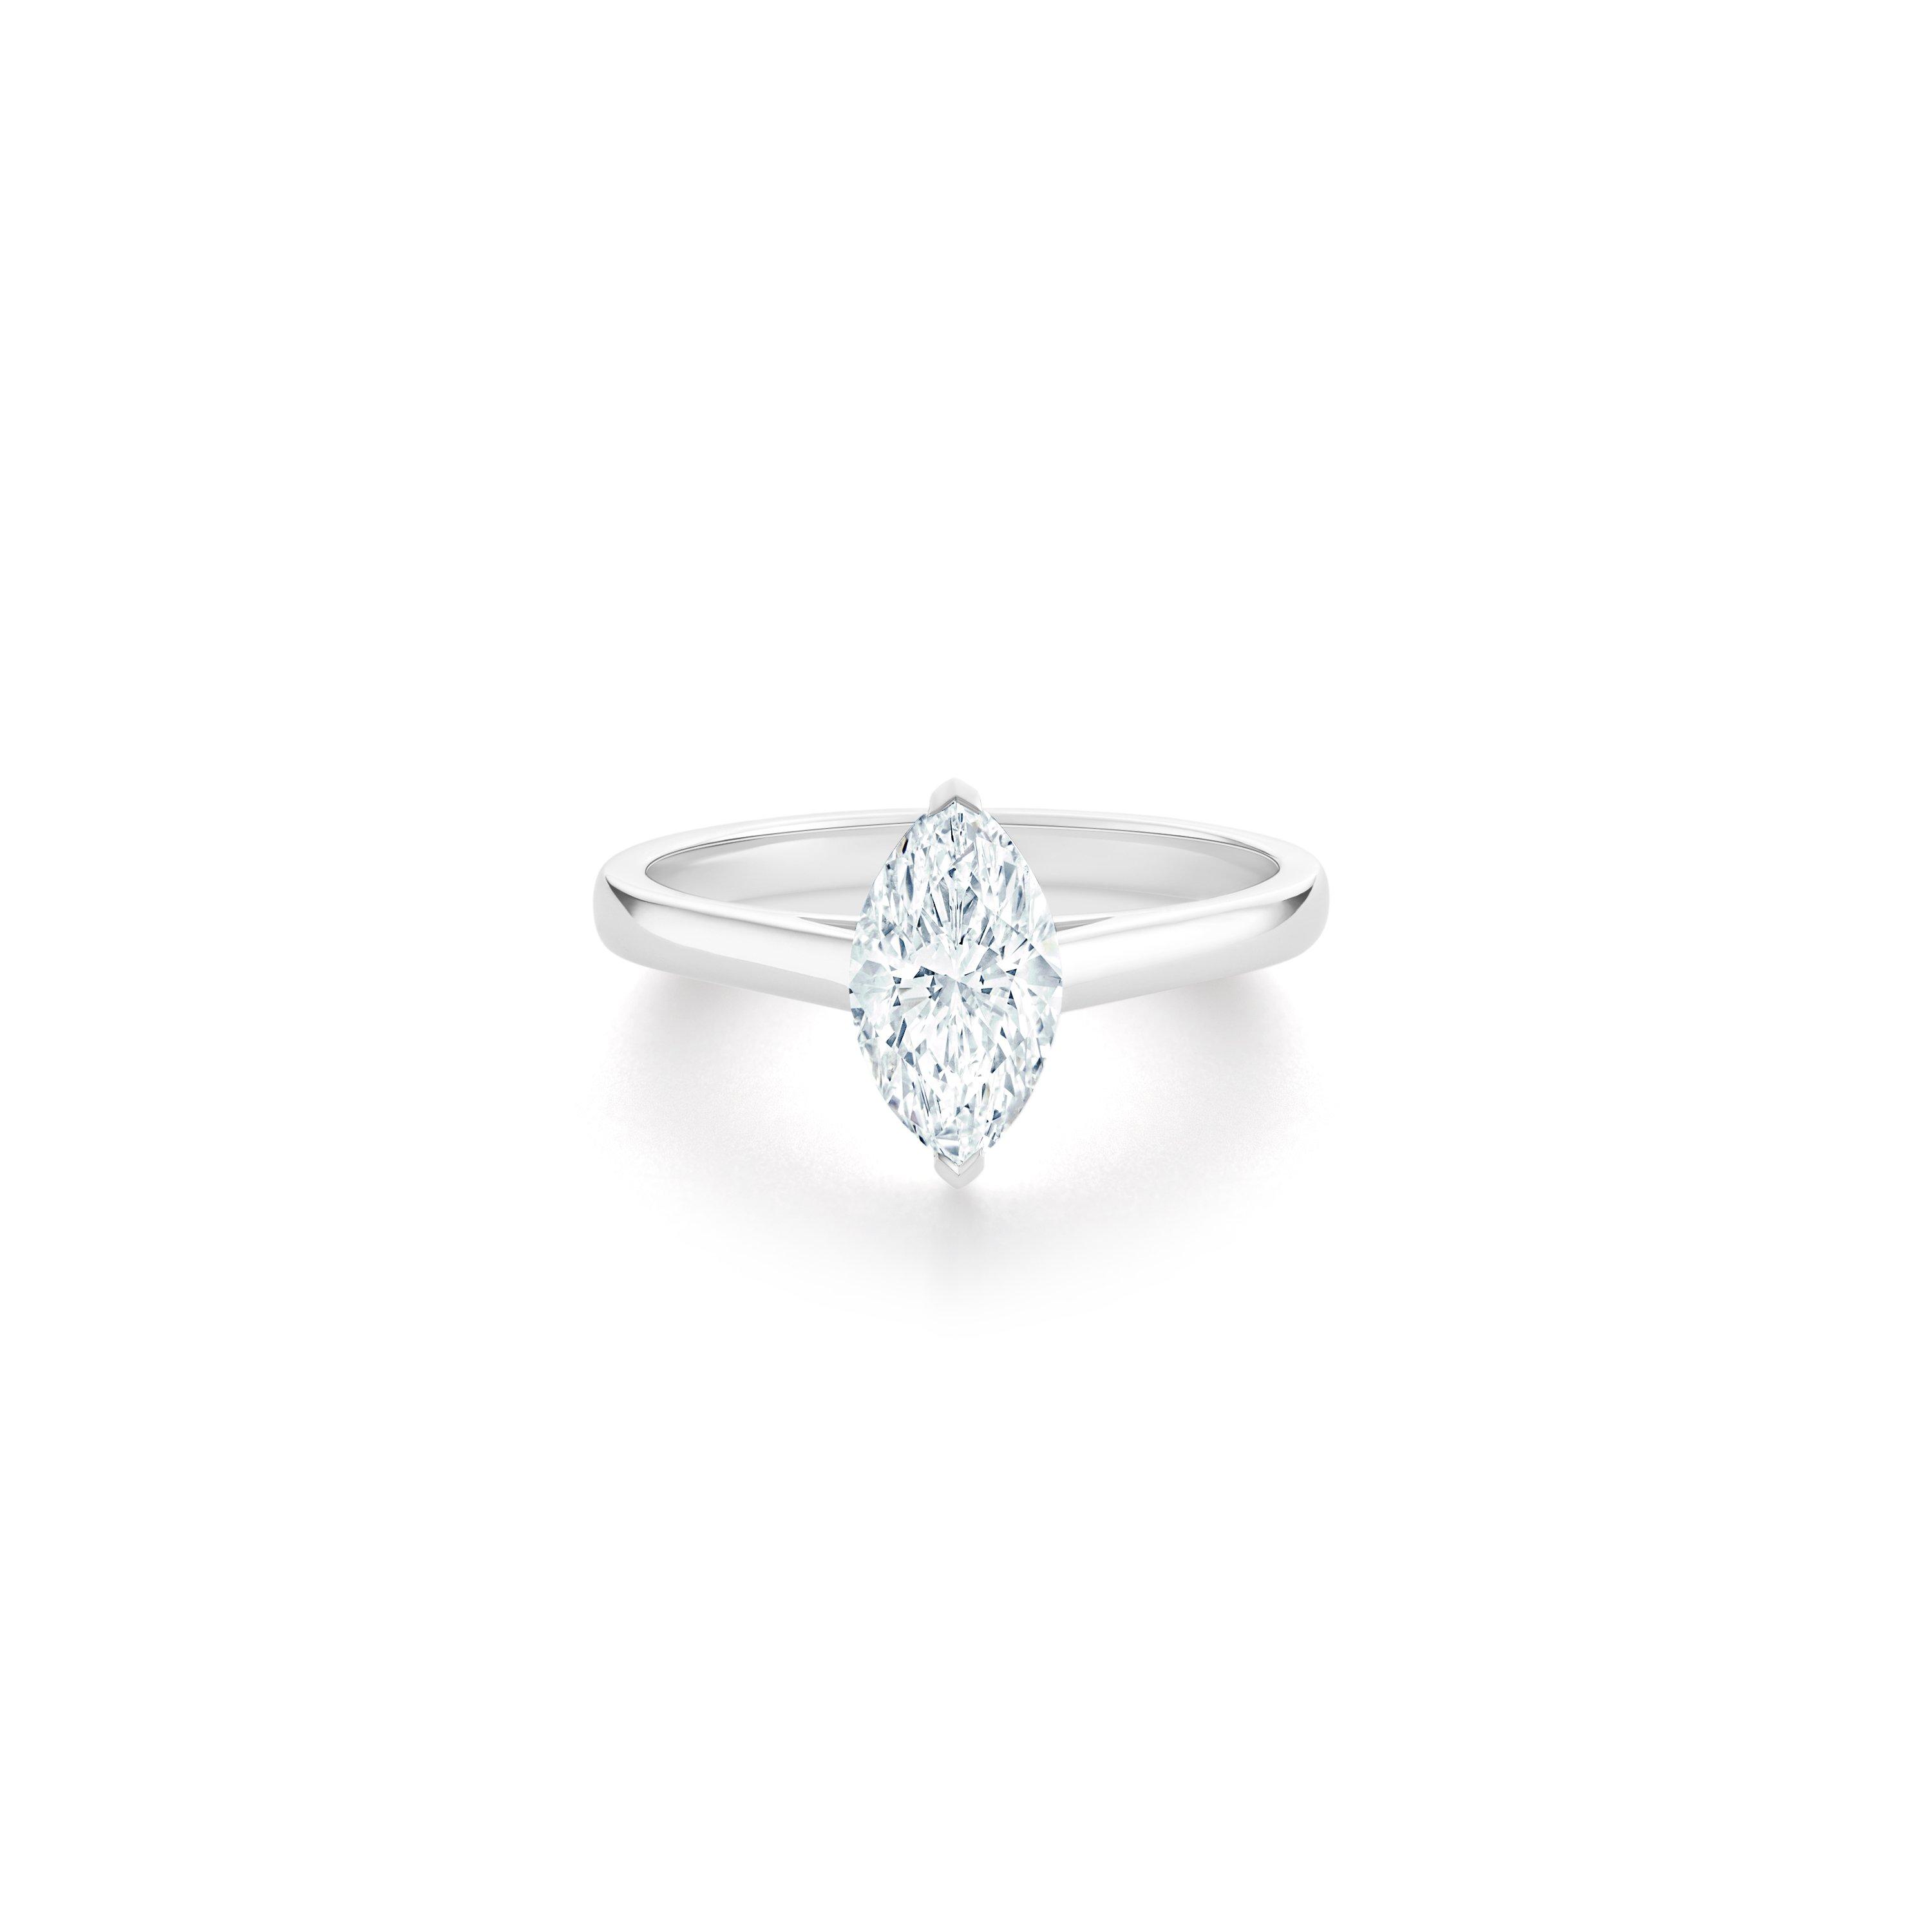 Solitaire DB Classic diamant taille marquise